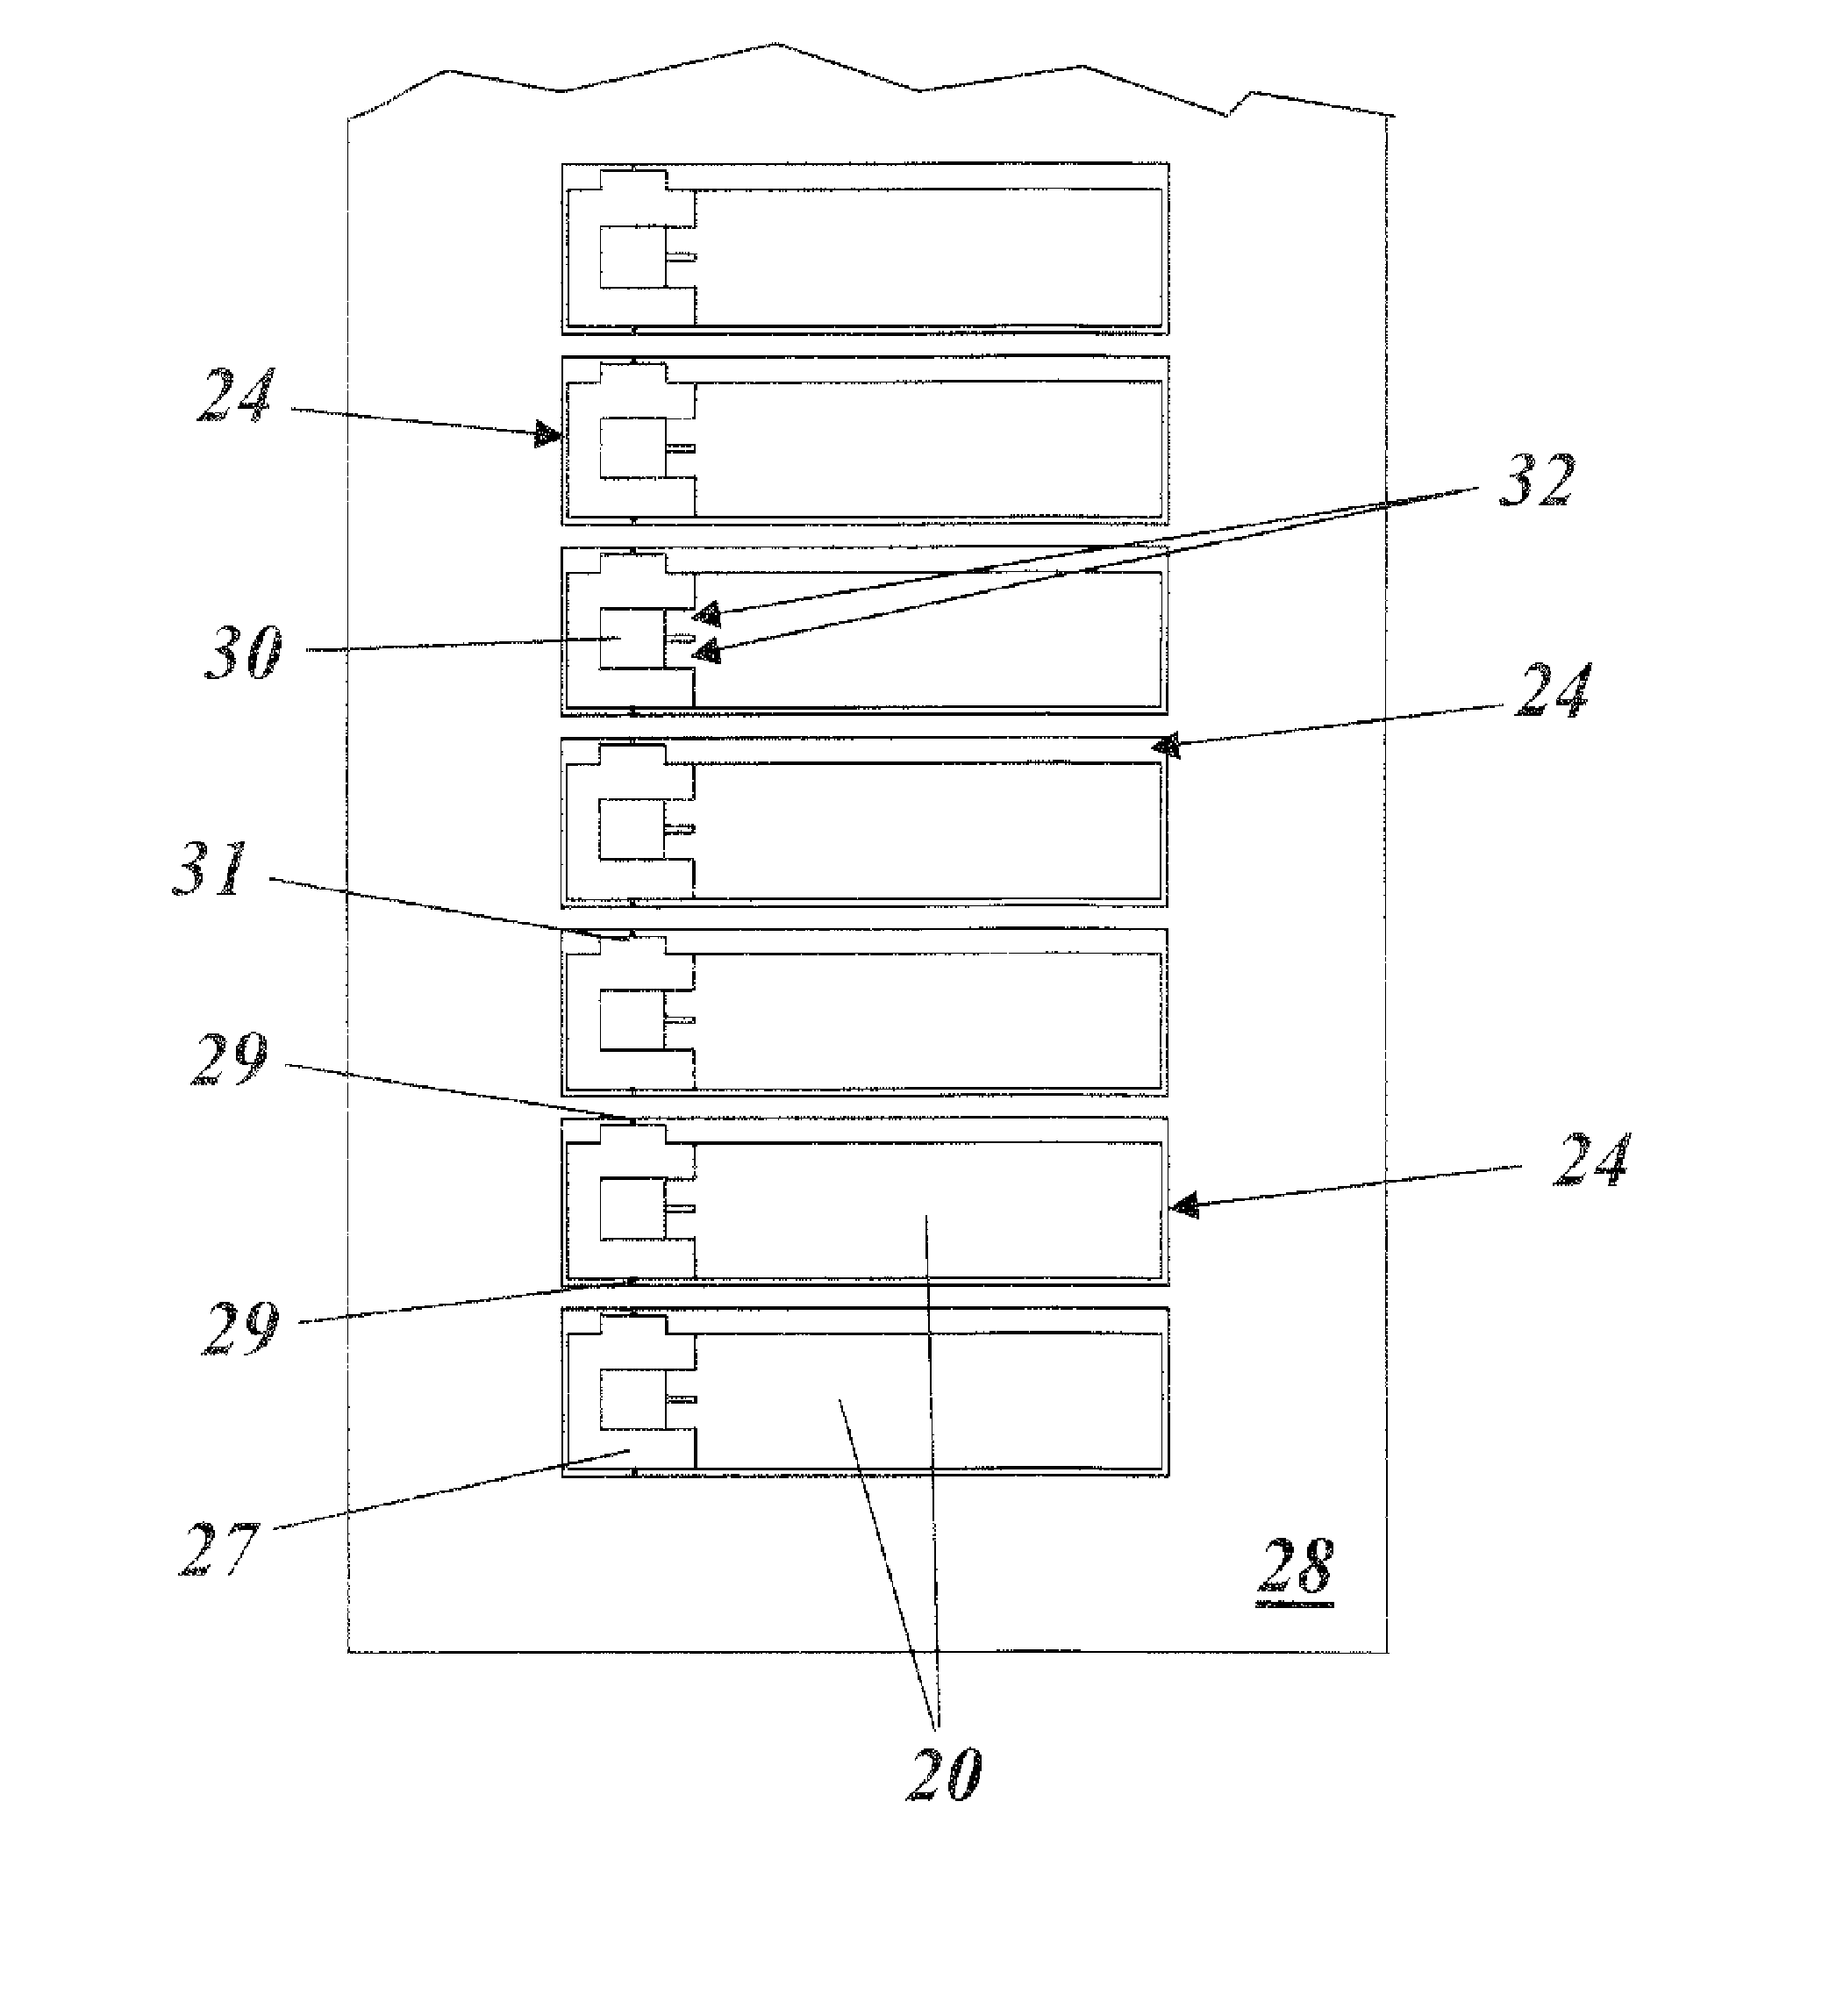 Process for producing leaves for leaf seal